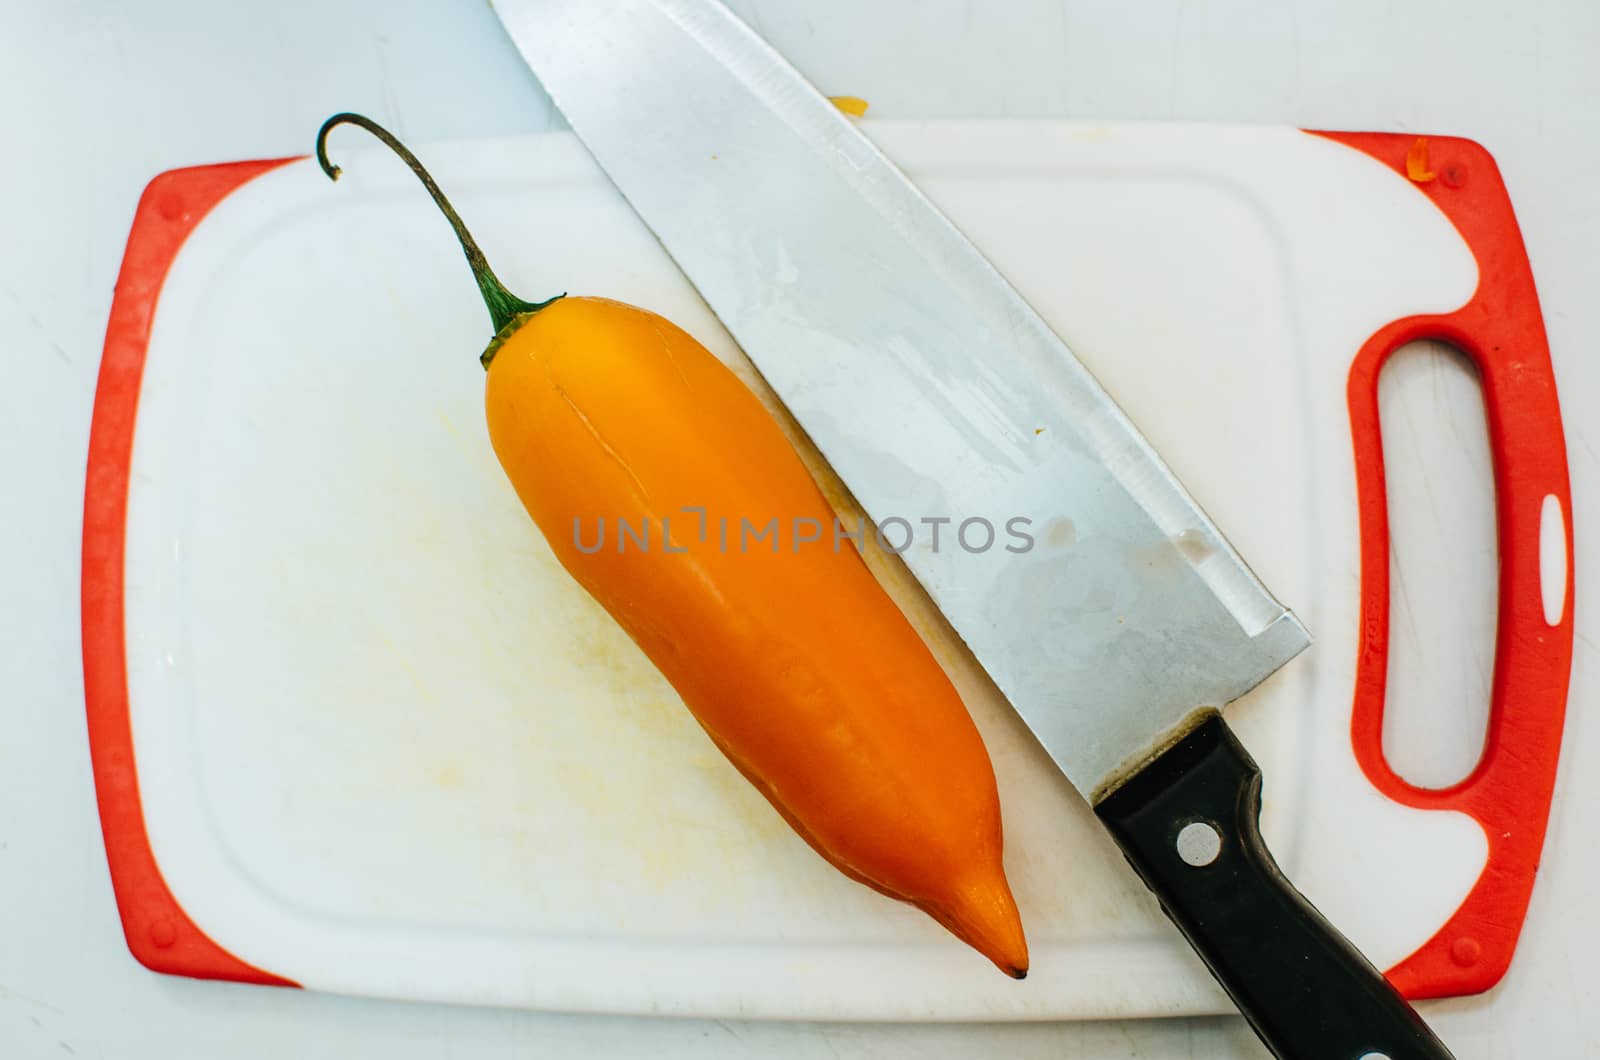 Chili pepper and a knife on a chopping board